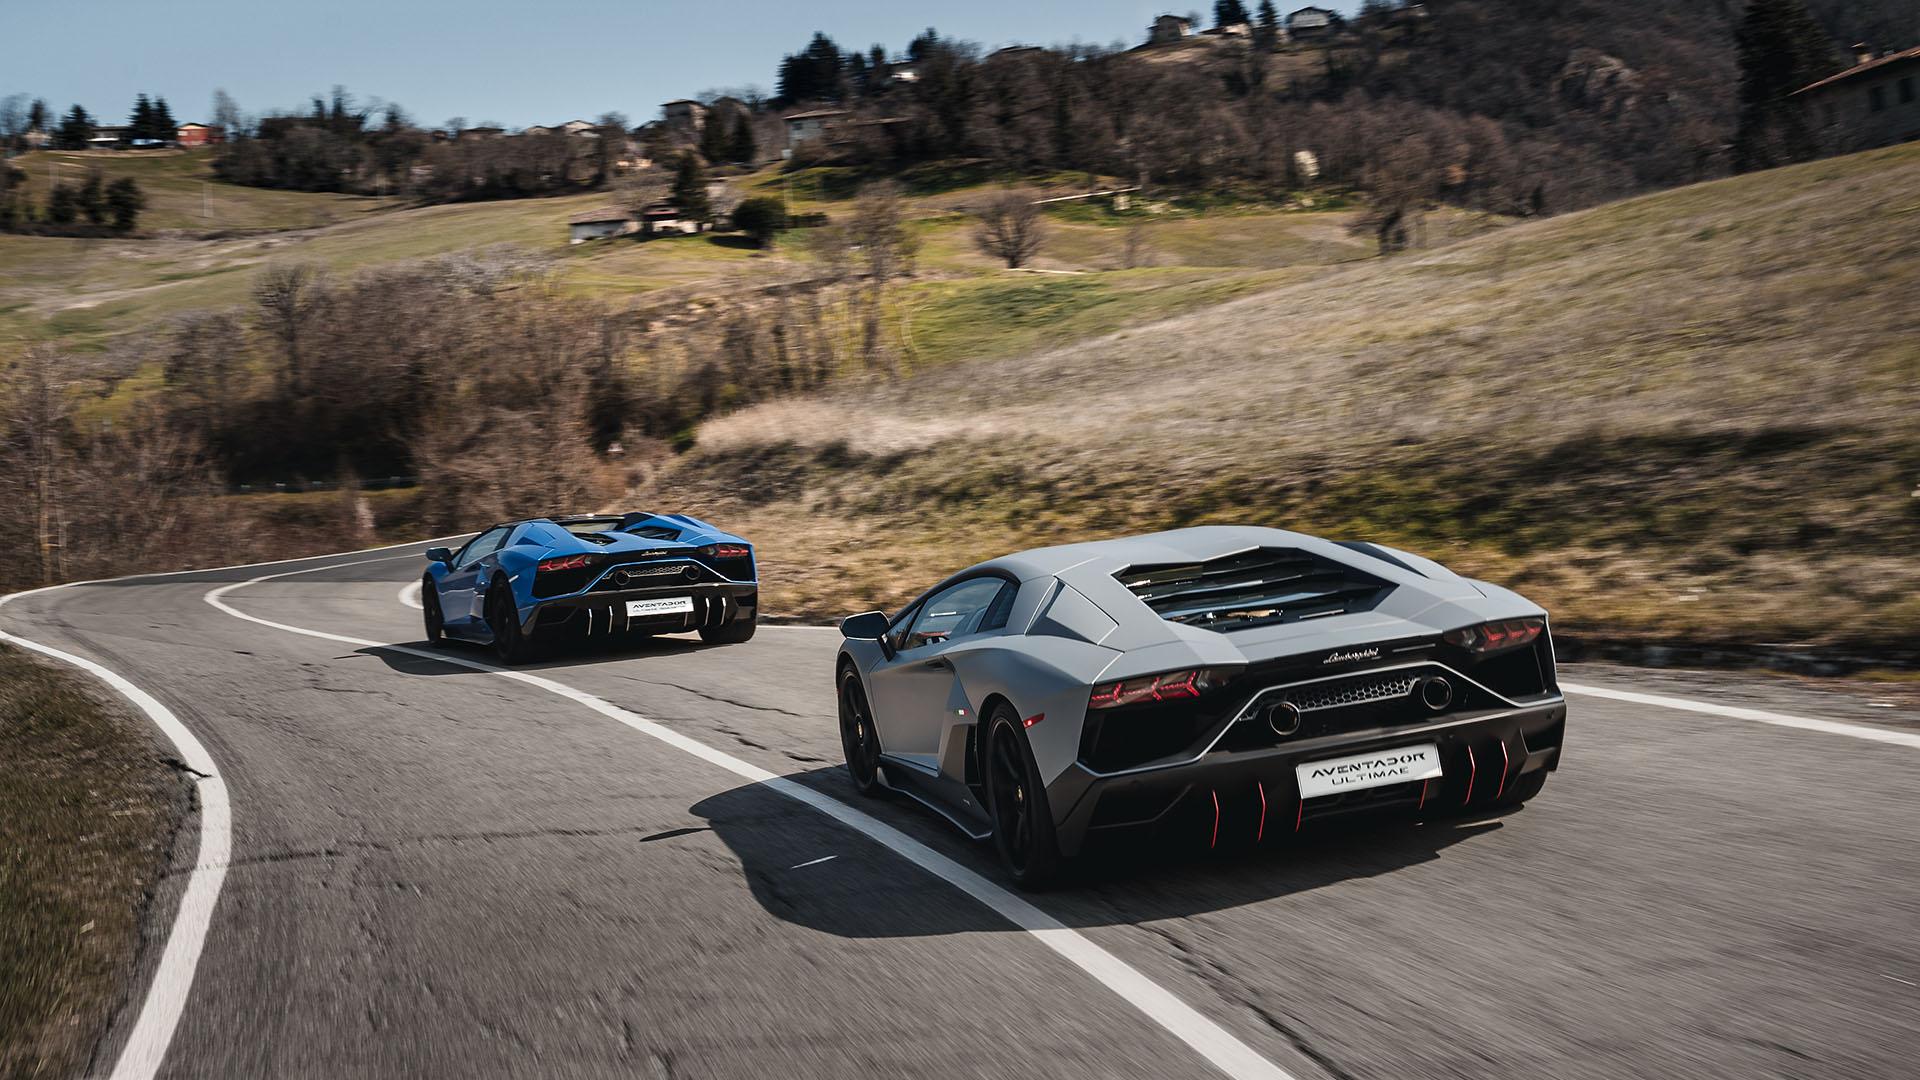 Aventador ultimae on the road 16